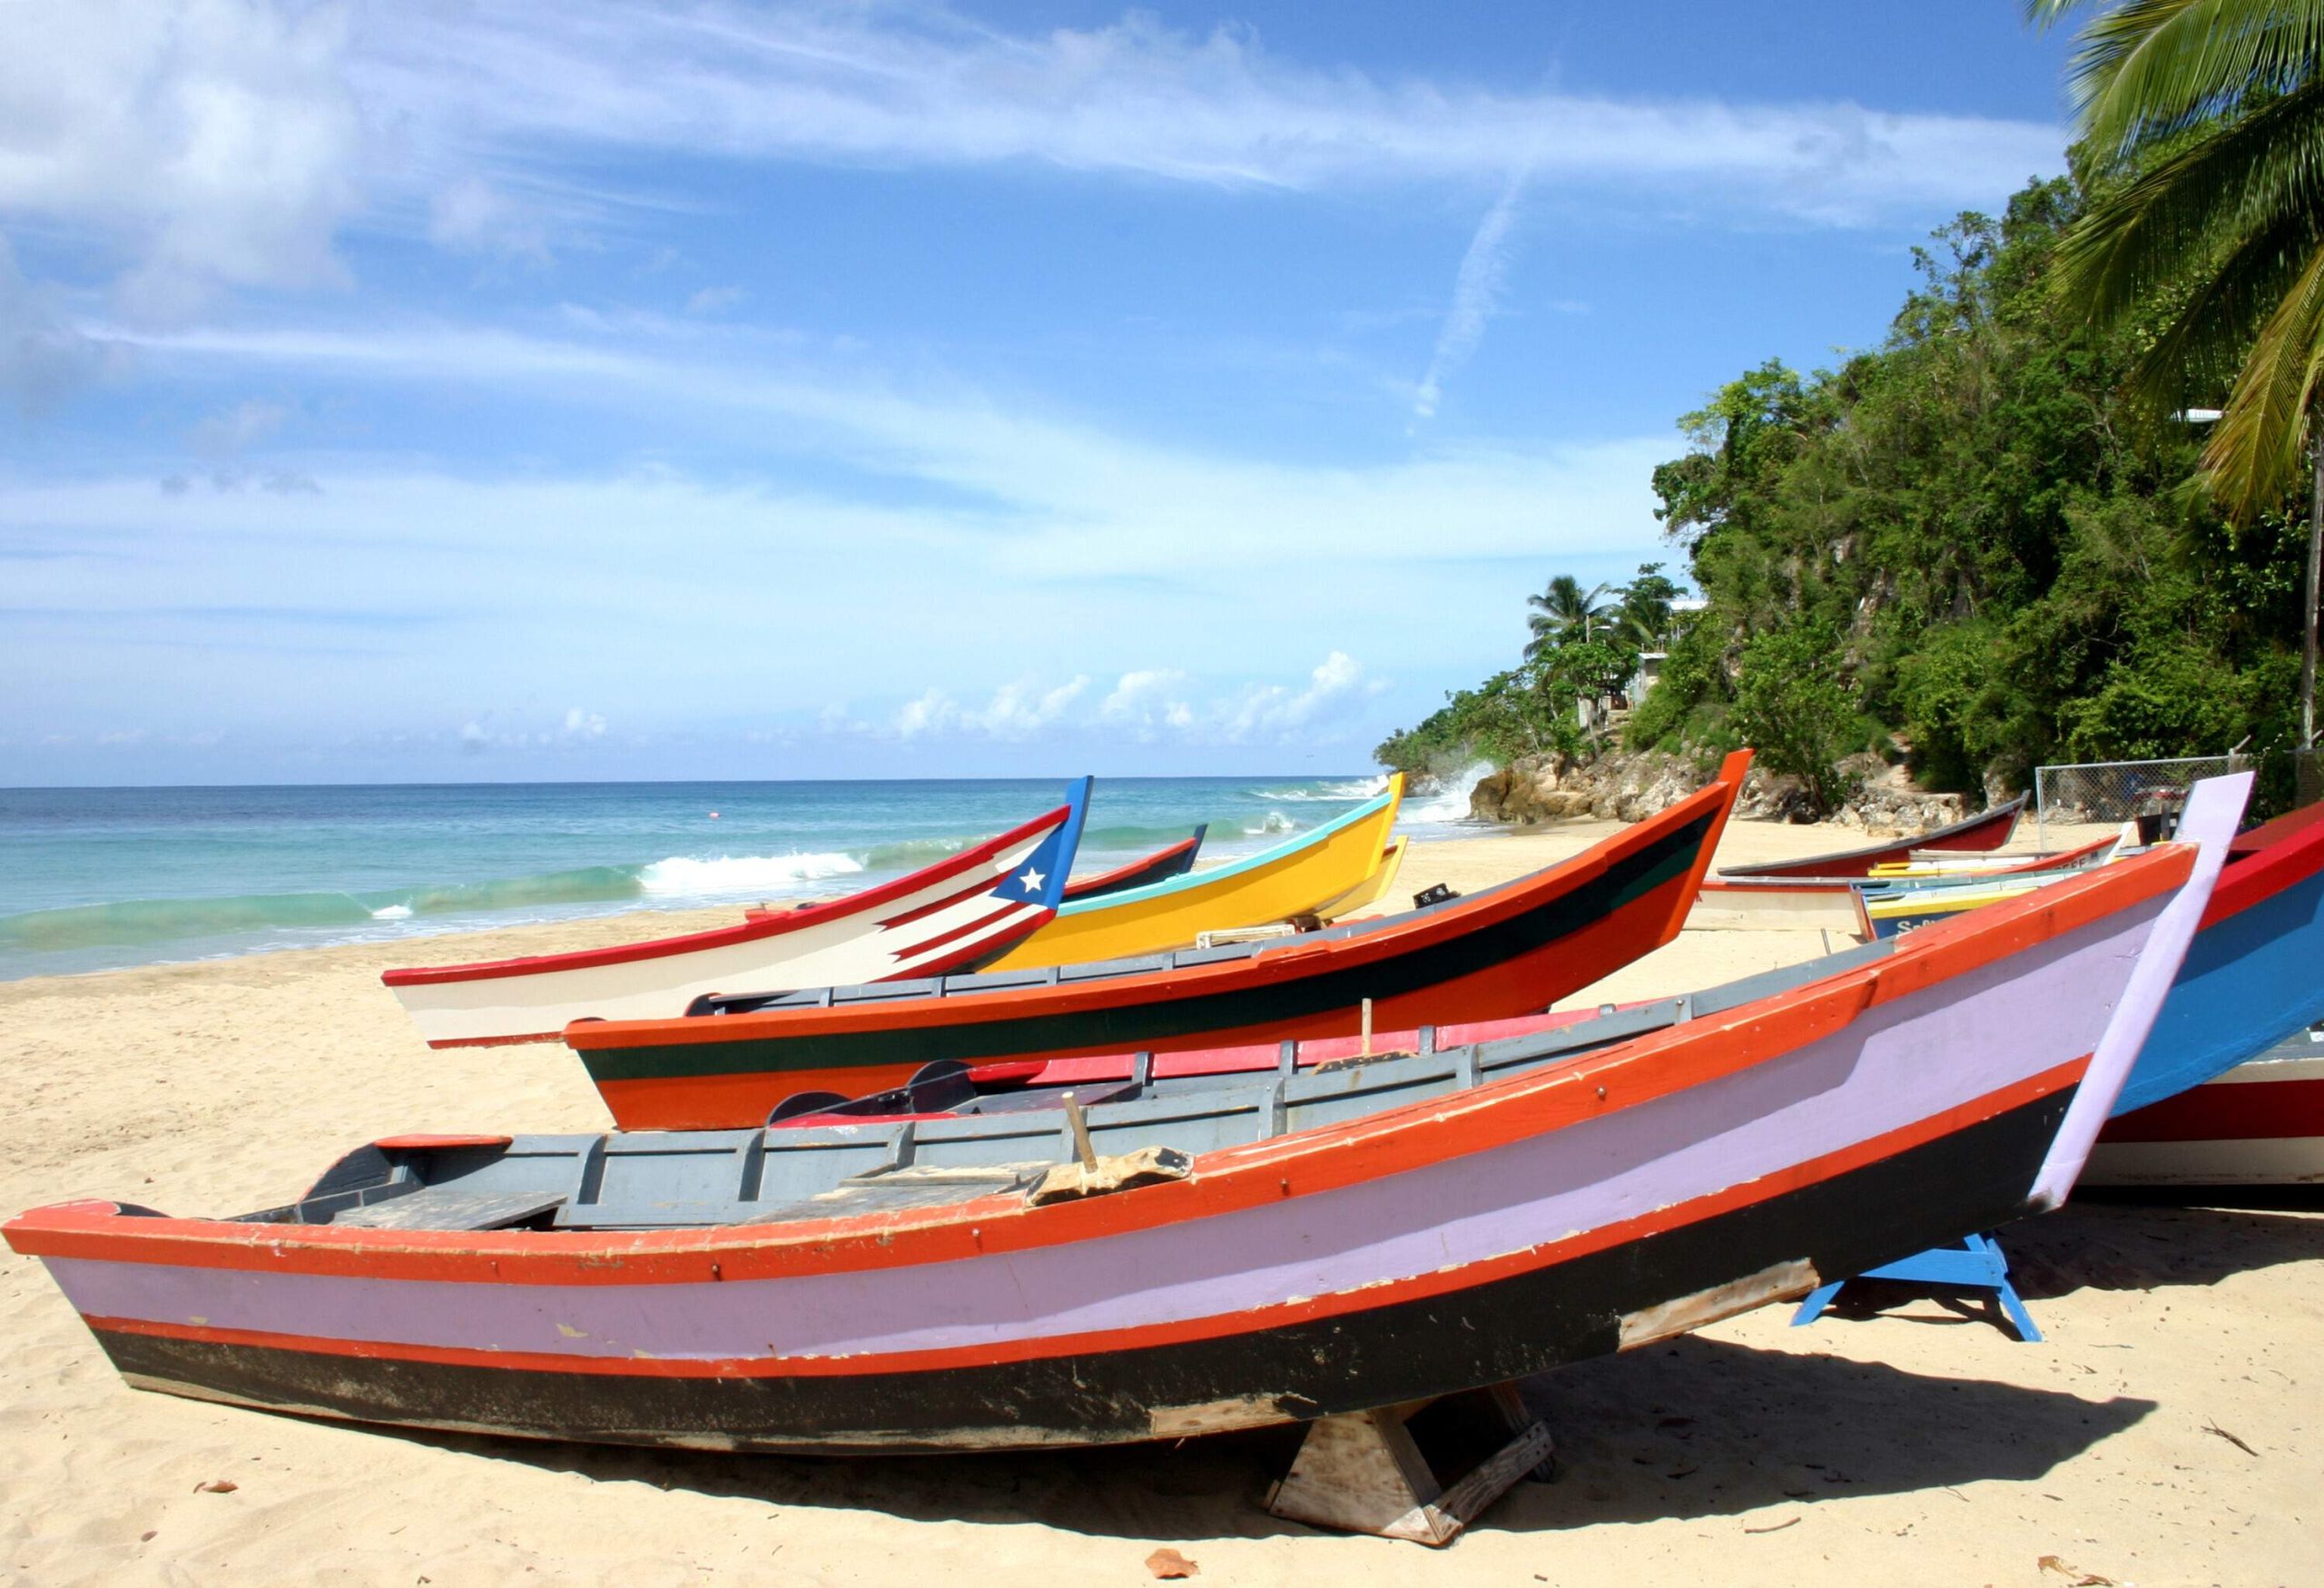 Colourful fishing boats lined up on the empty shore alongside the calm sea.